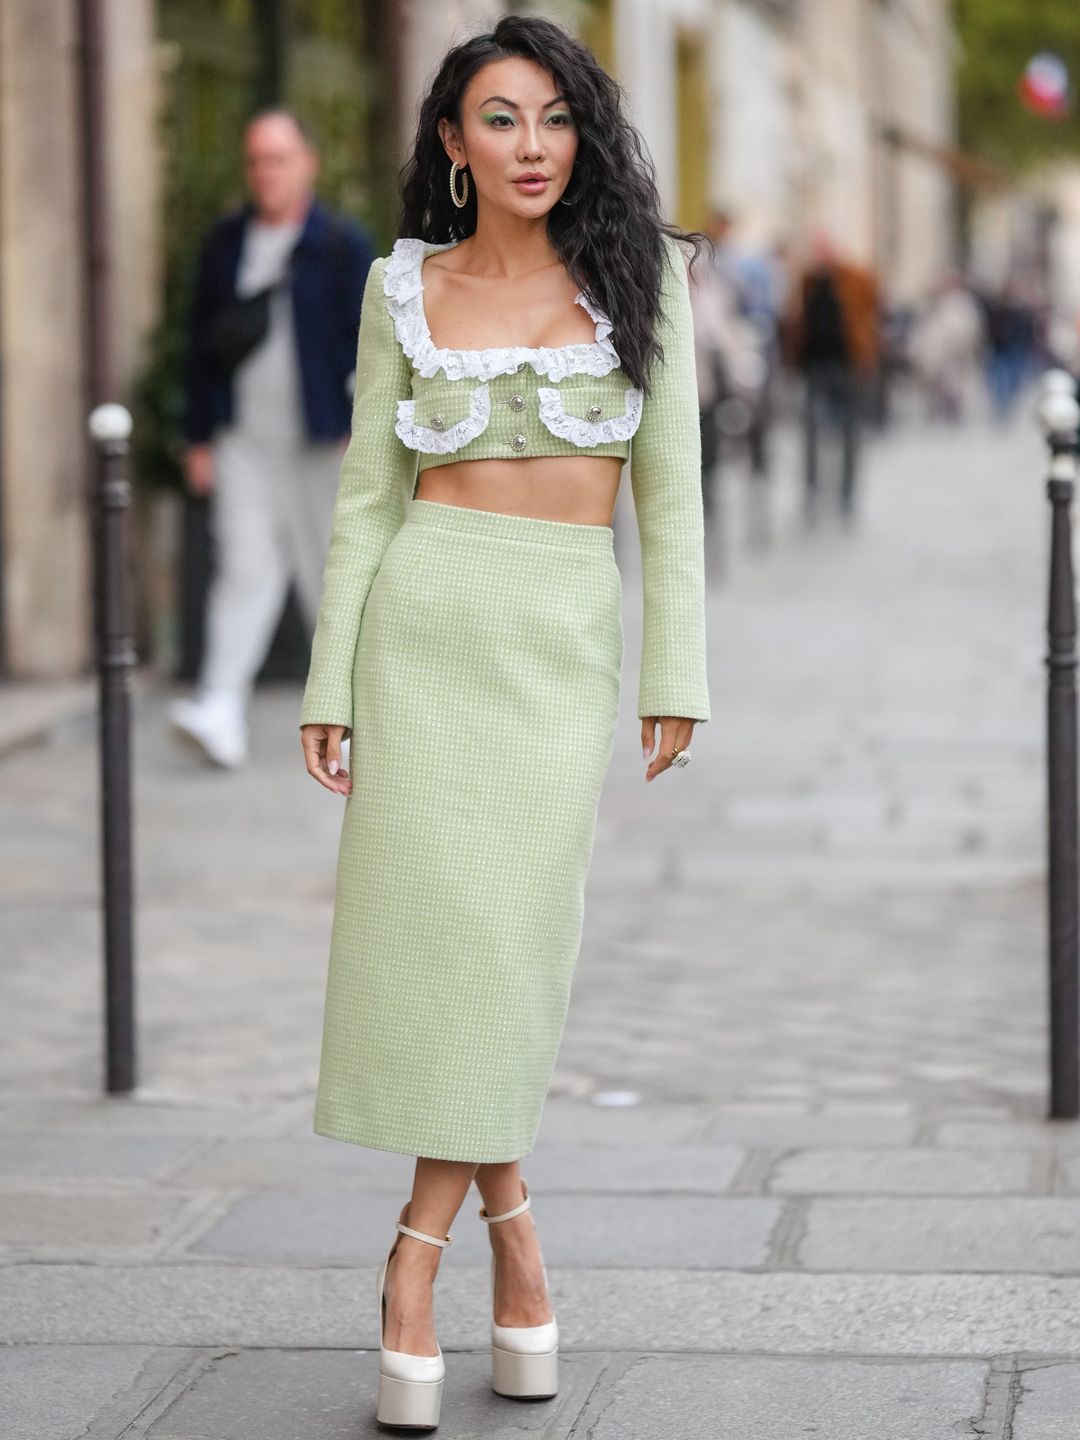 Jessica Wang wears a pale green lace-trimmed crop top with a matching skirt 